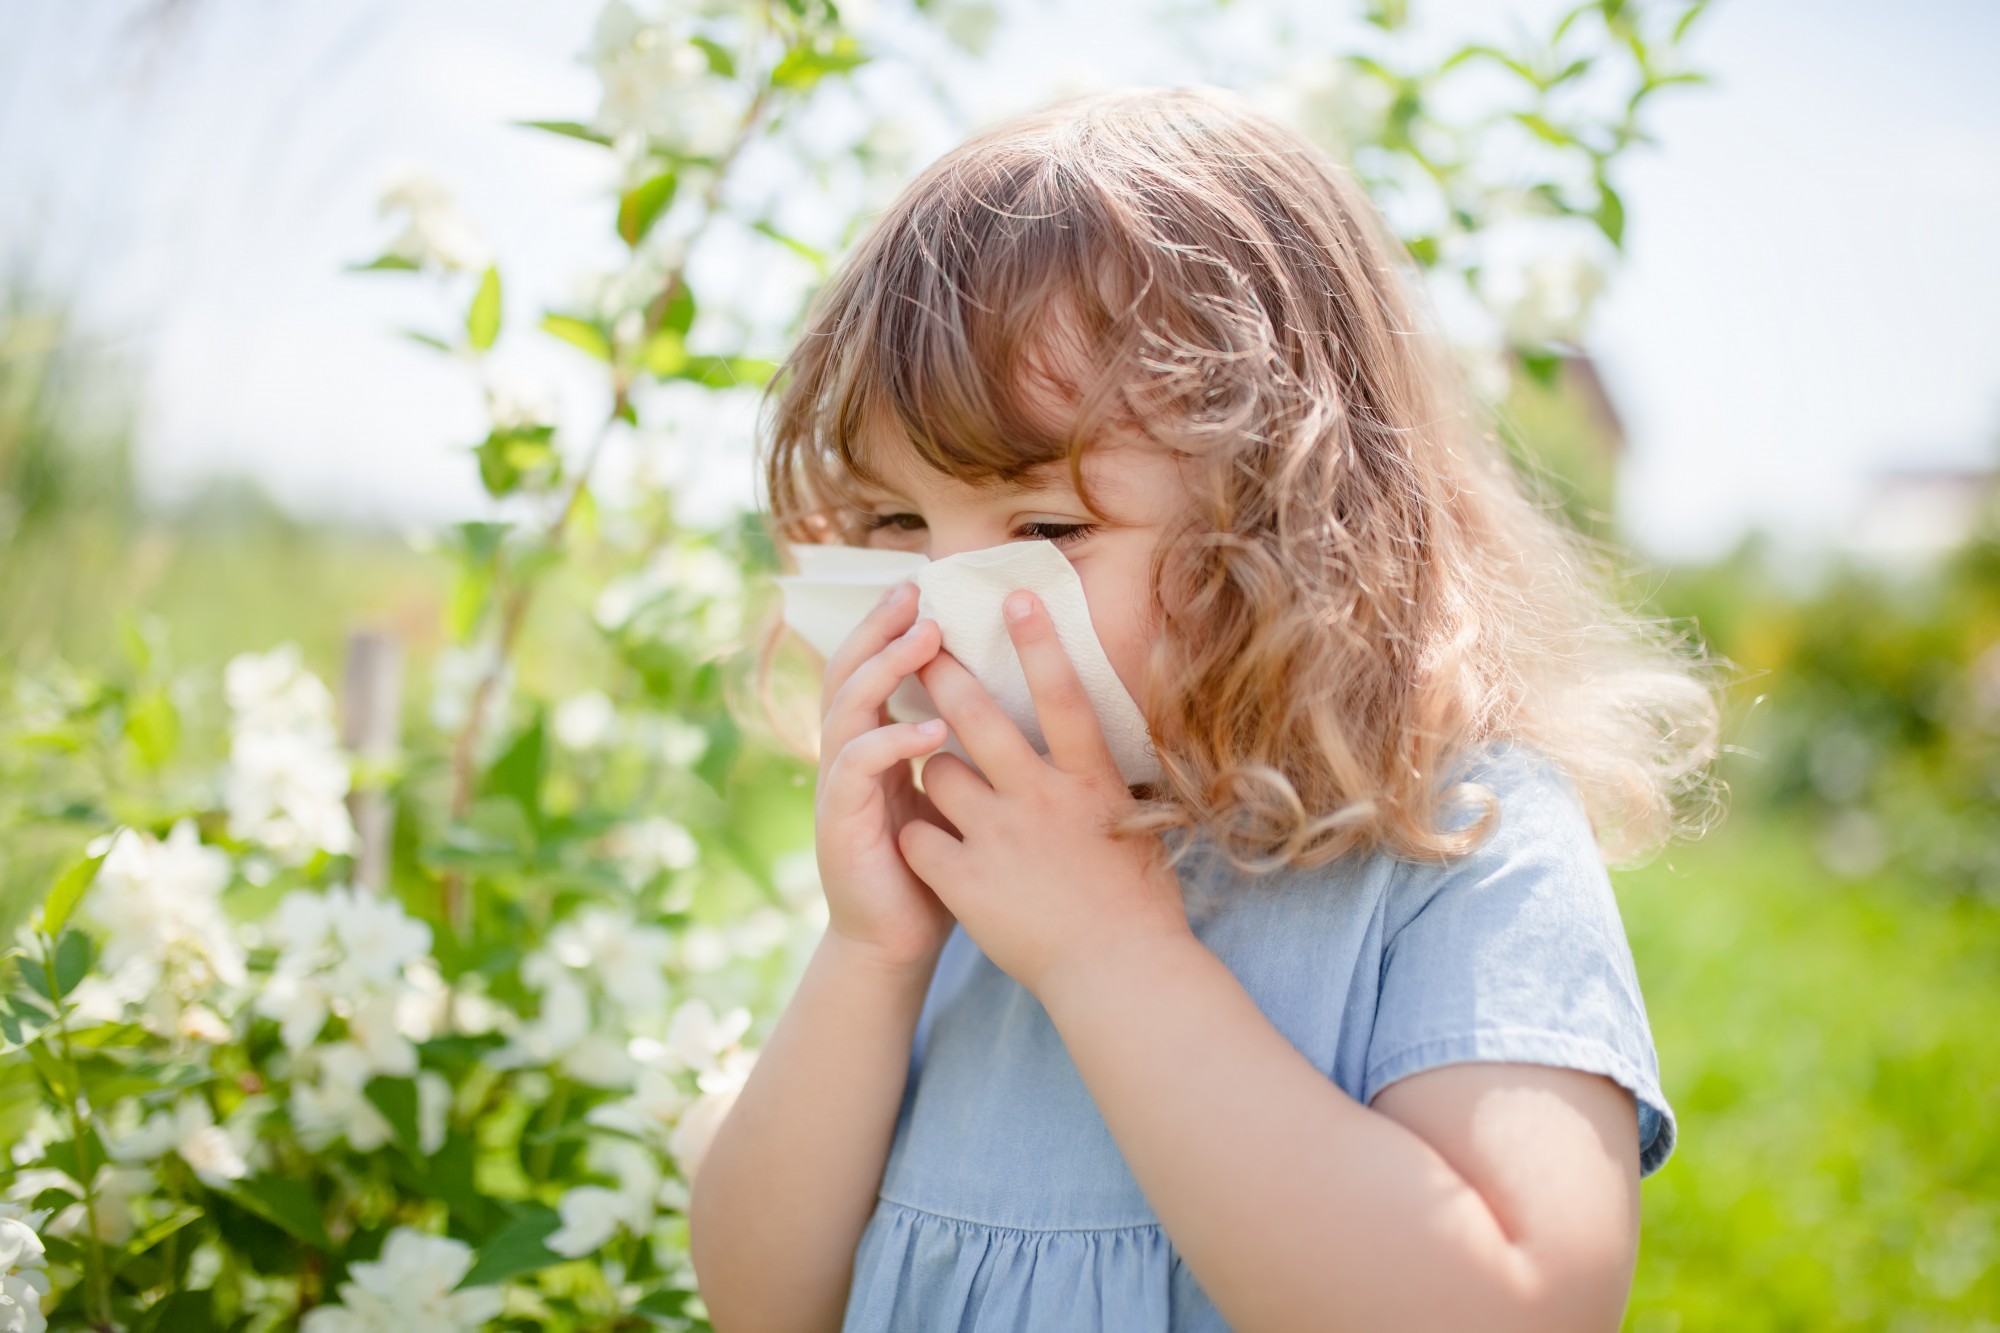 Does My Child Have Allergies?